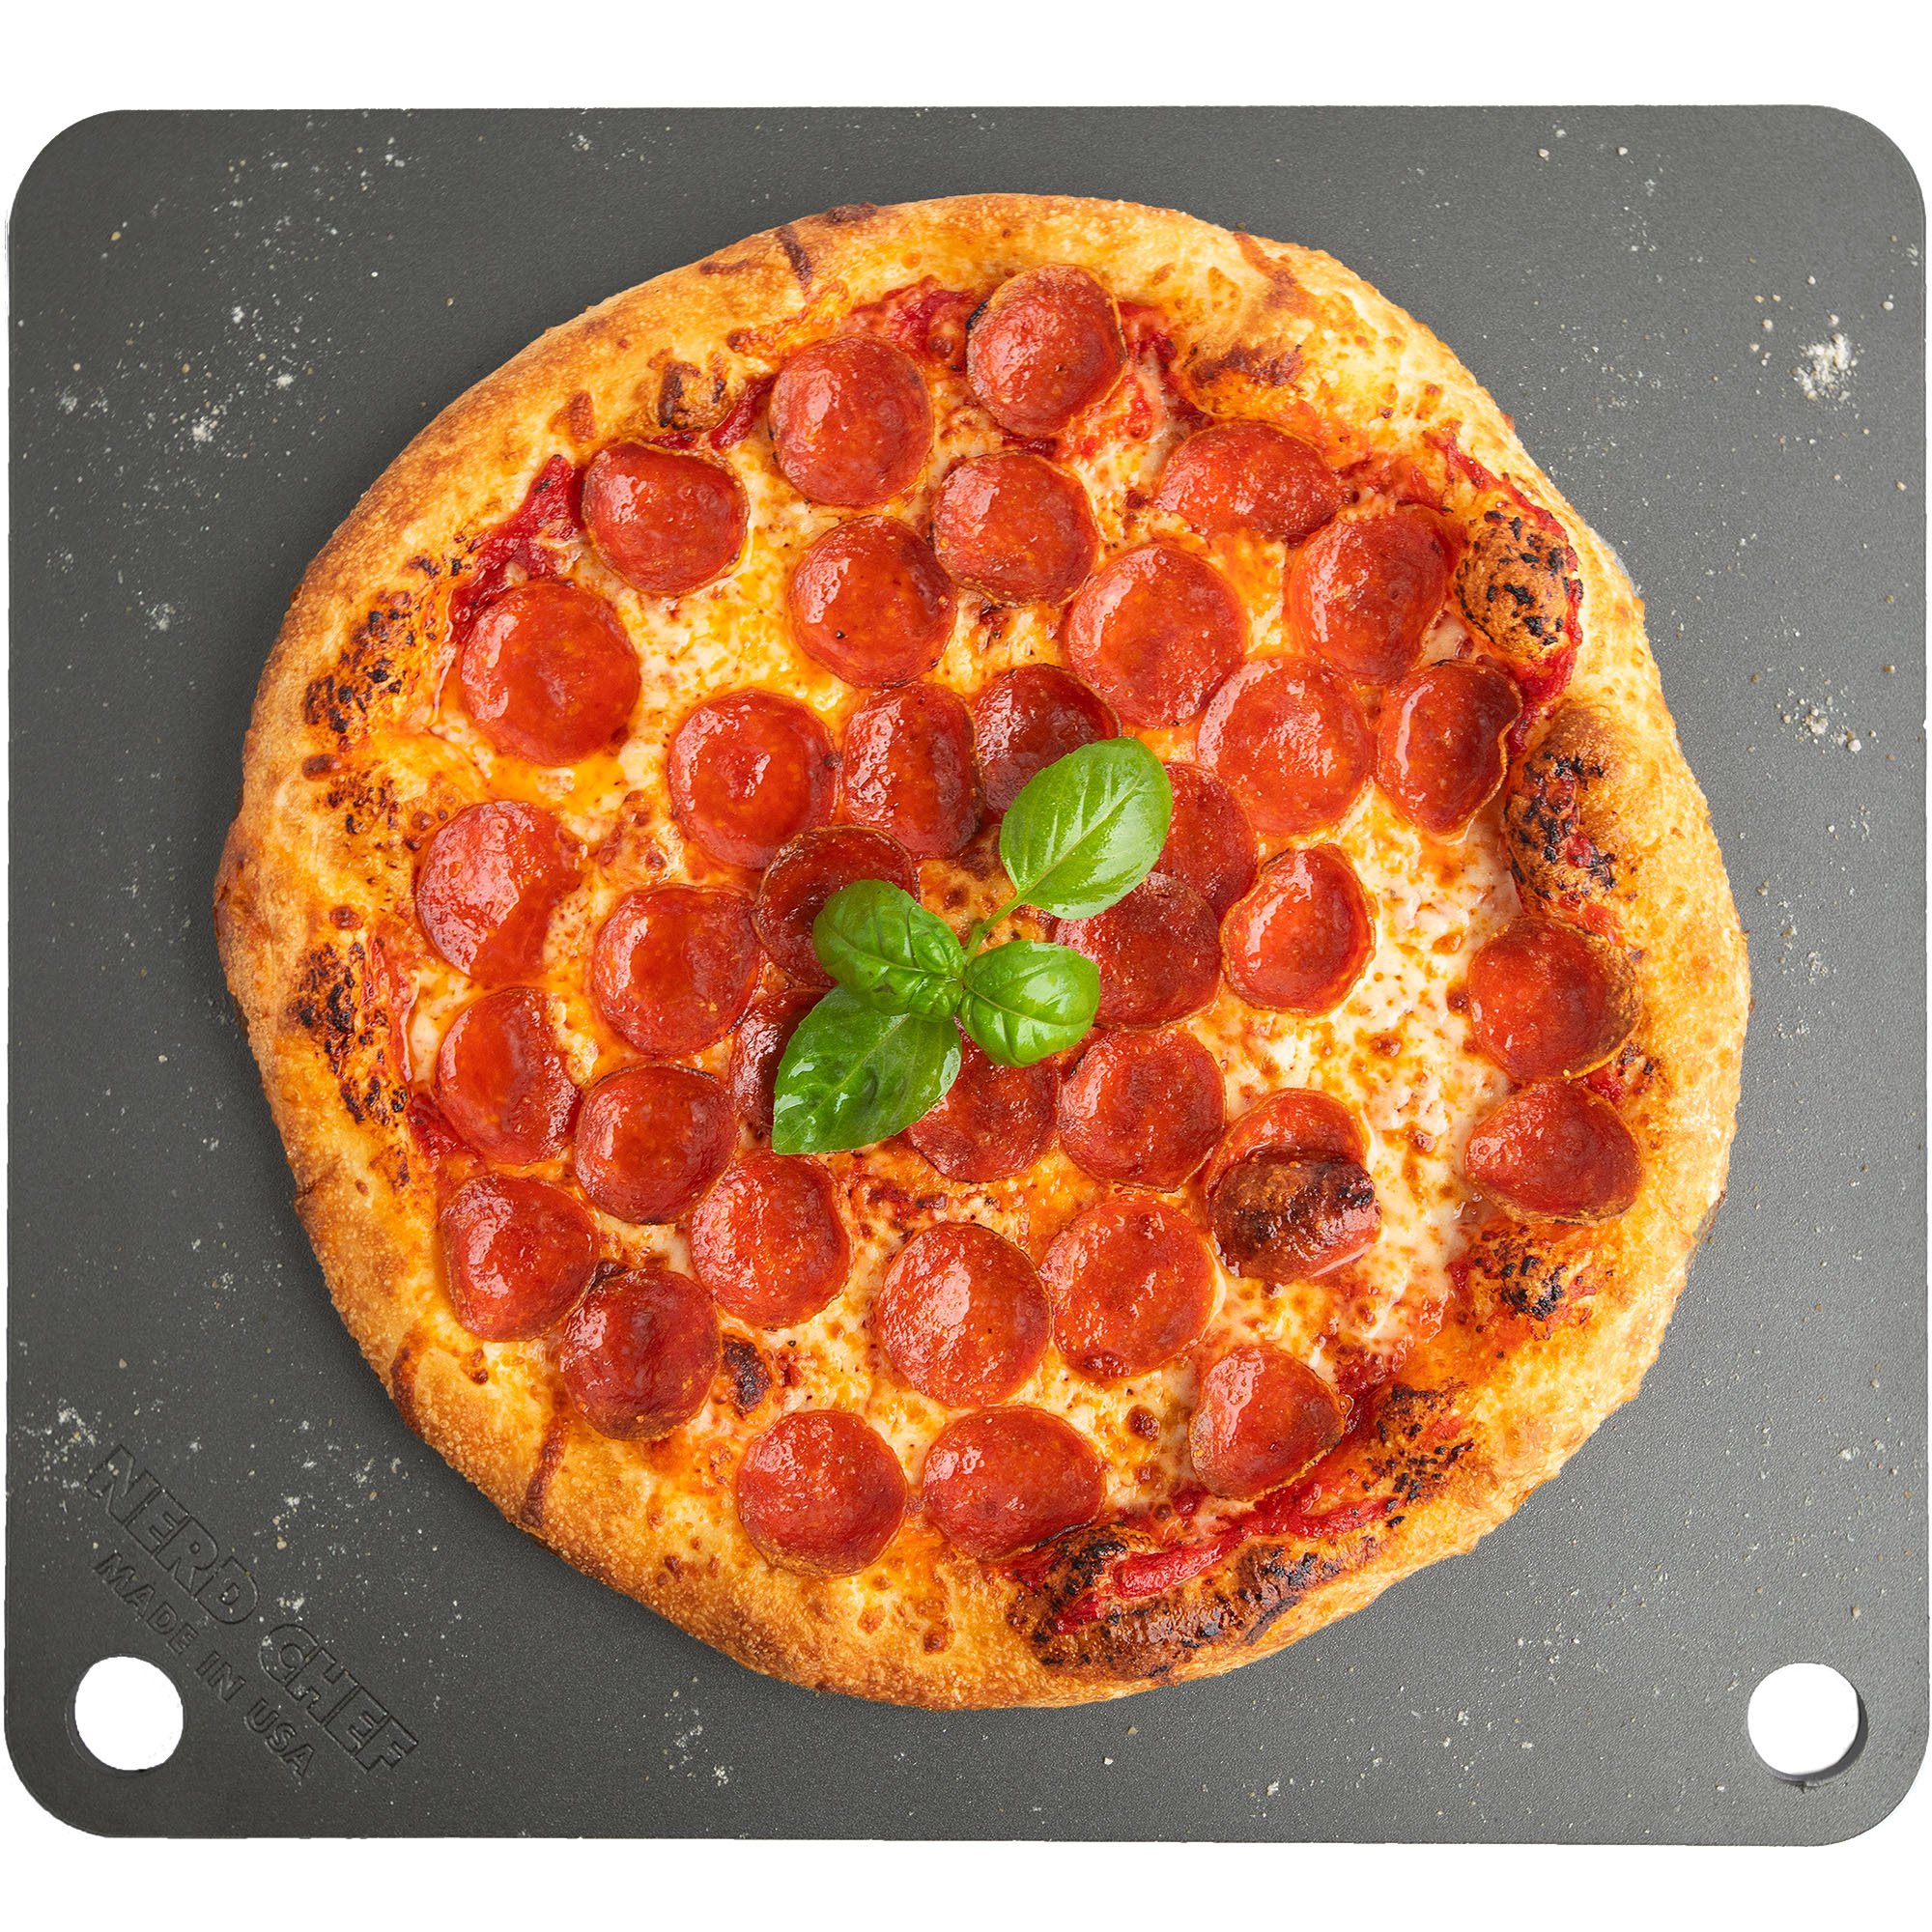 Pizza steel should be a thing for everyone that uses a home oven. : r/Pizza